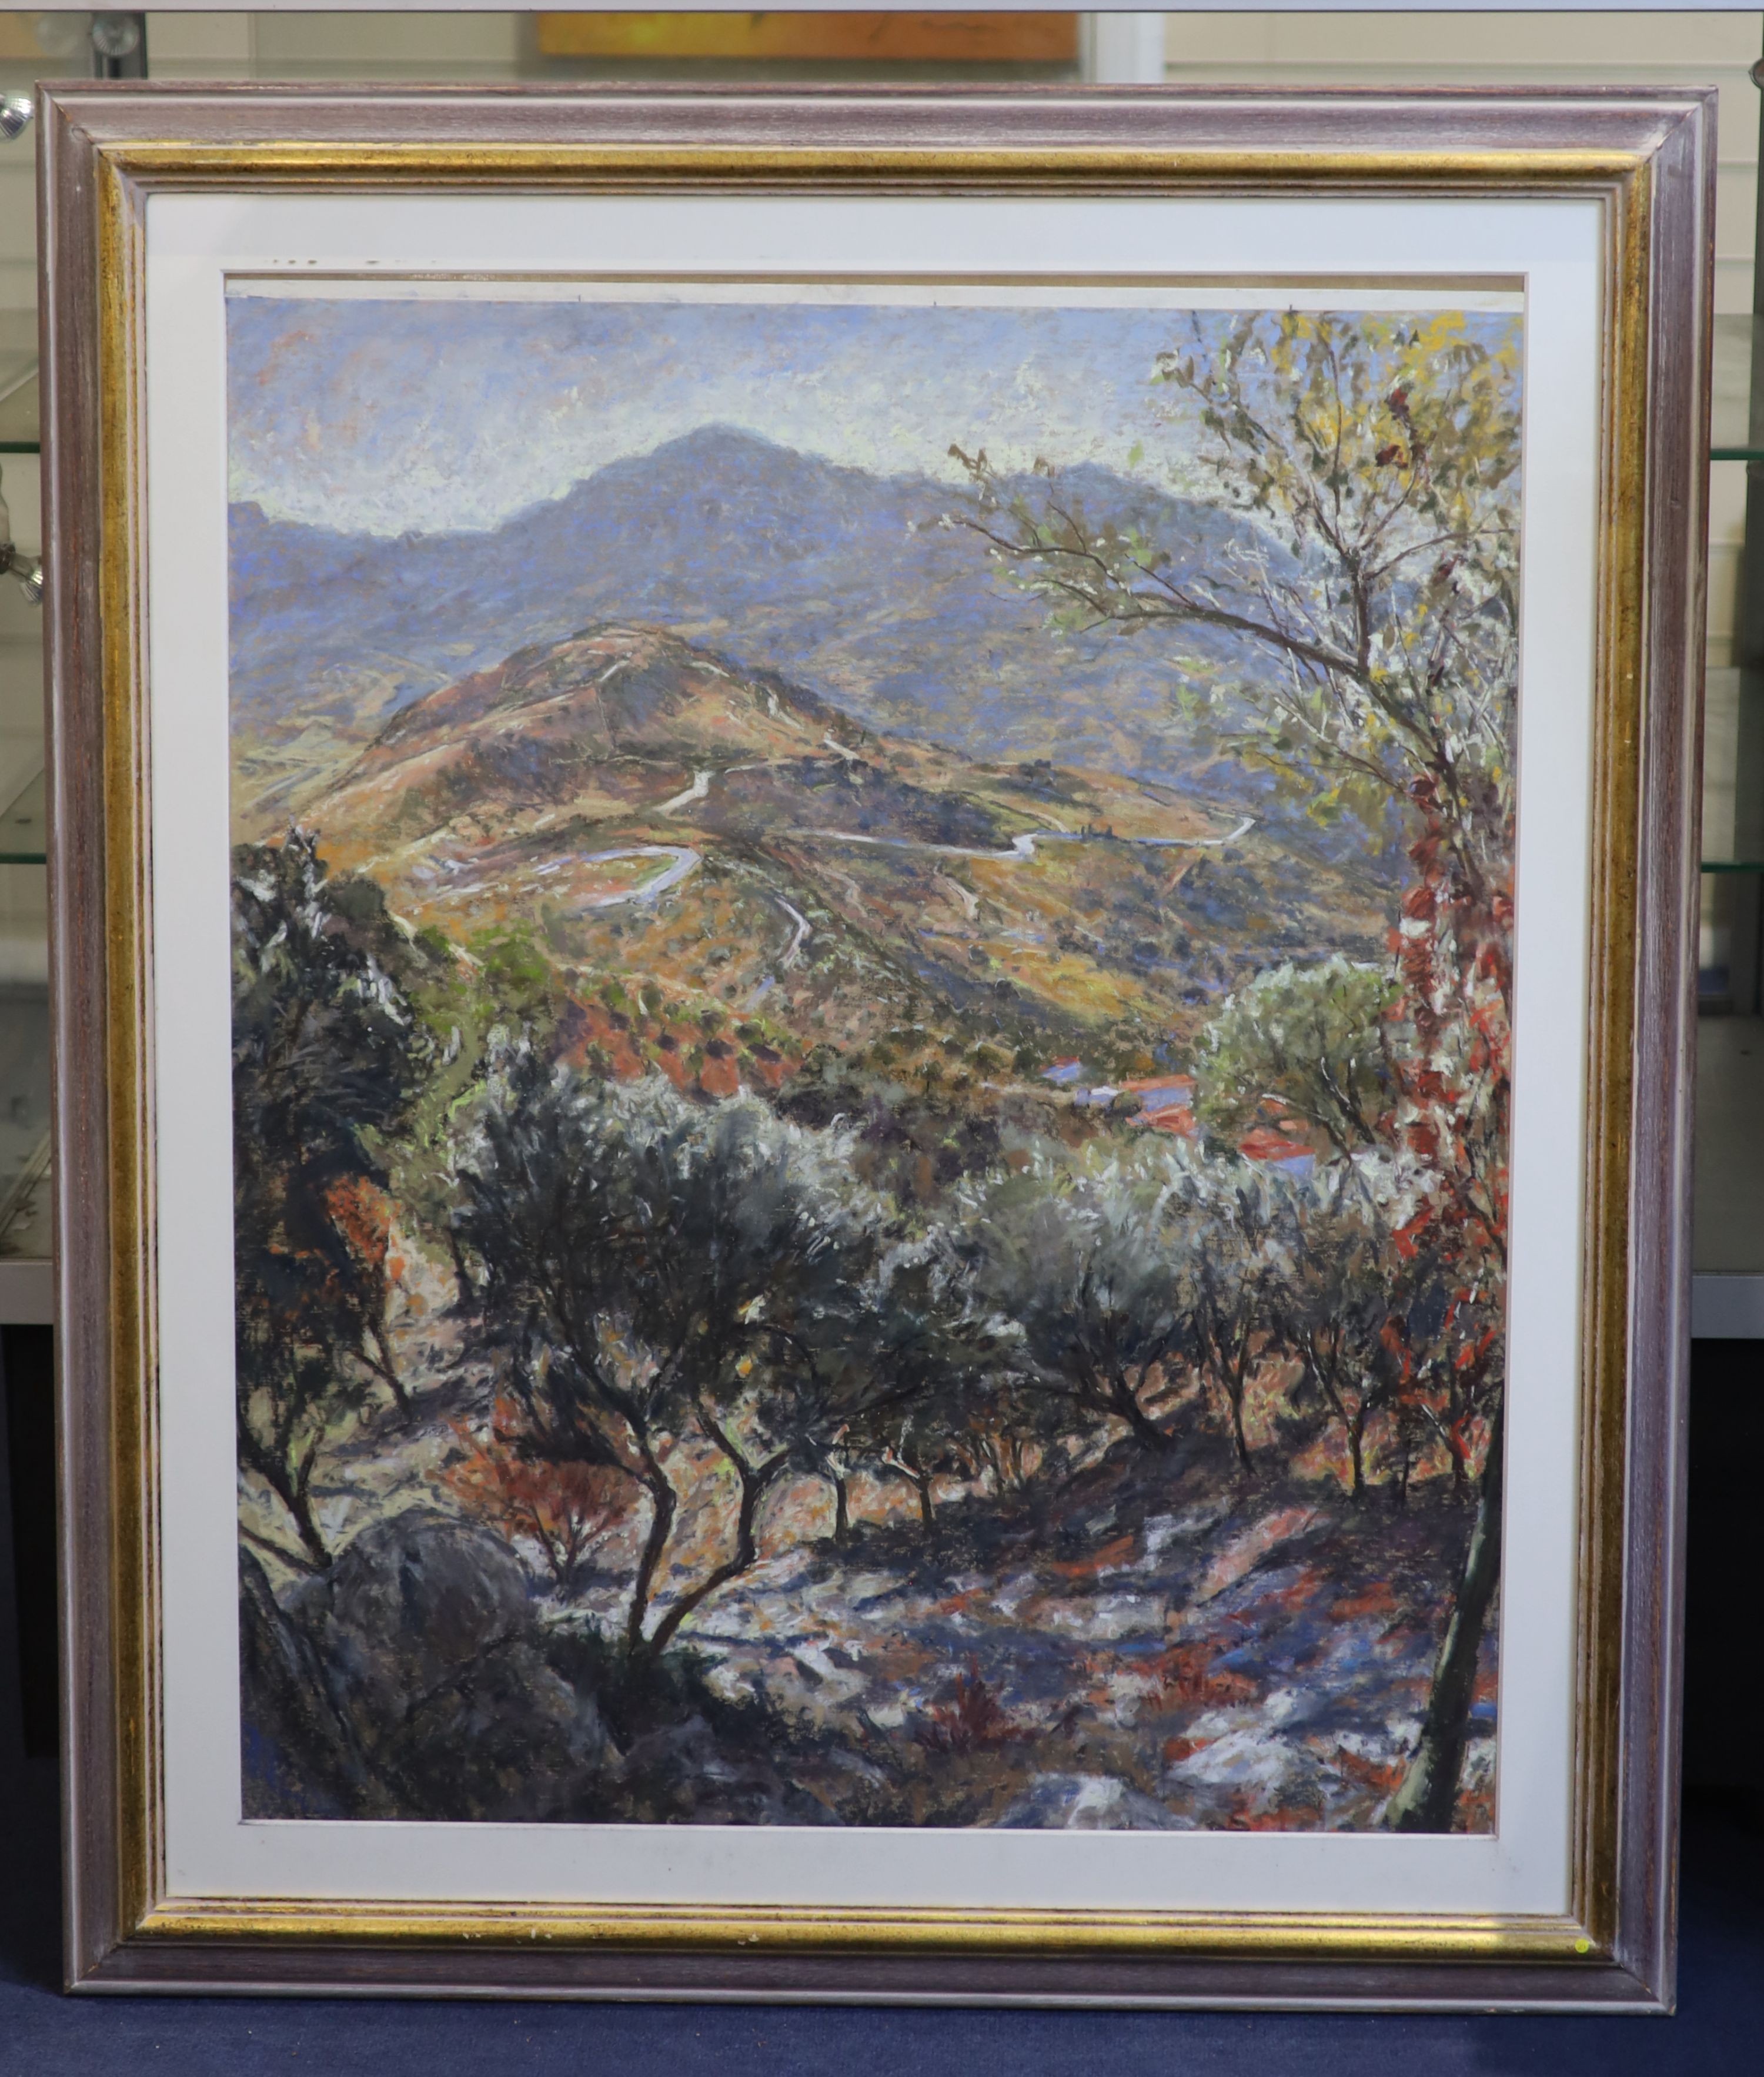 Patrick Cullen (Contemporary), Scorched Earth Mountains of Andalusia, mixed media, 90 x 74cm.